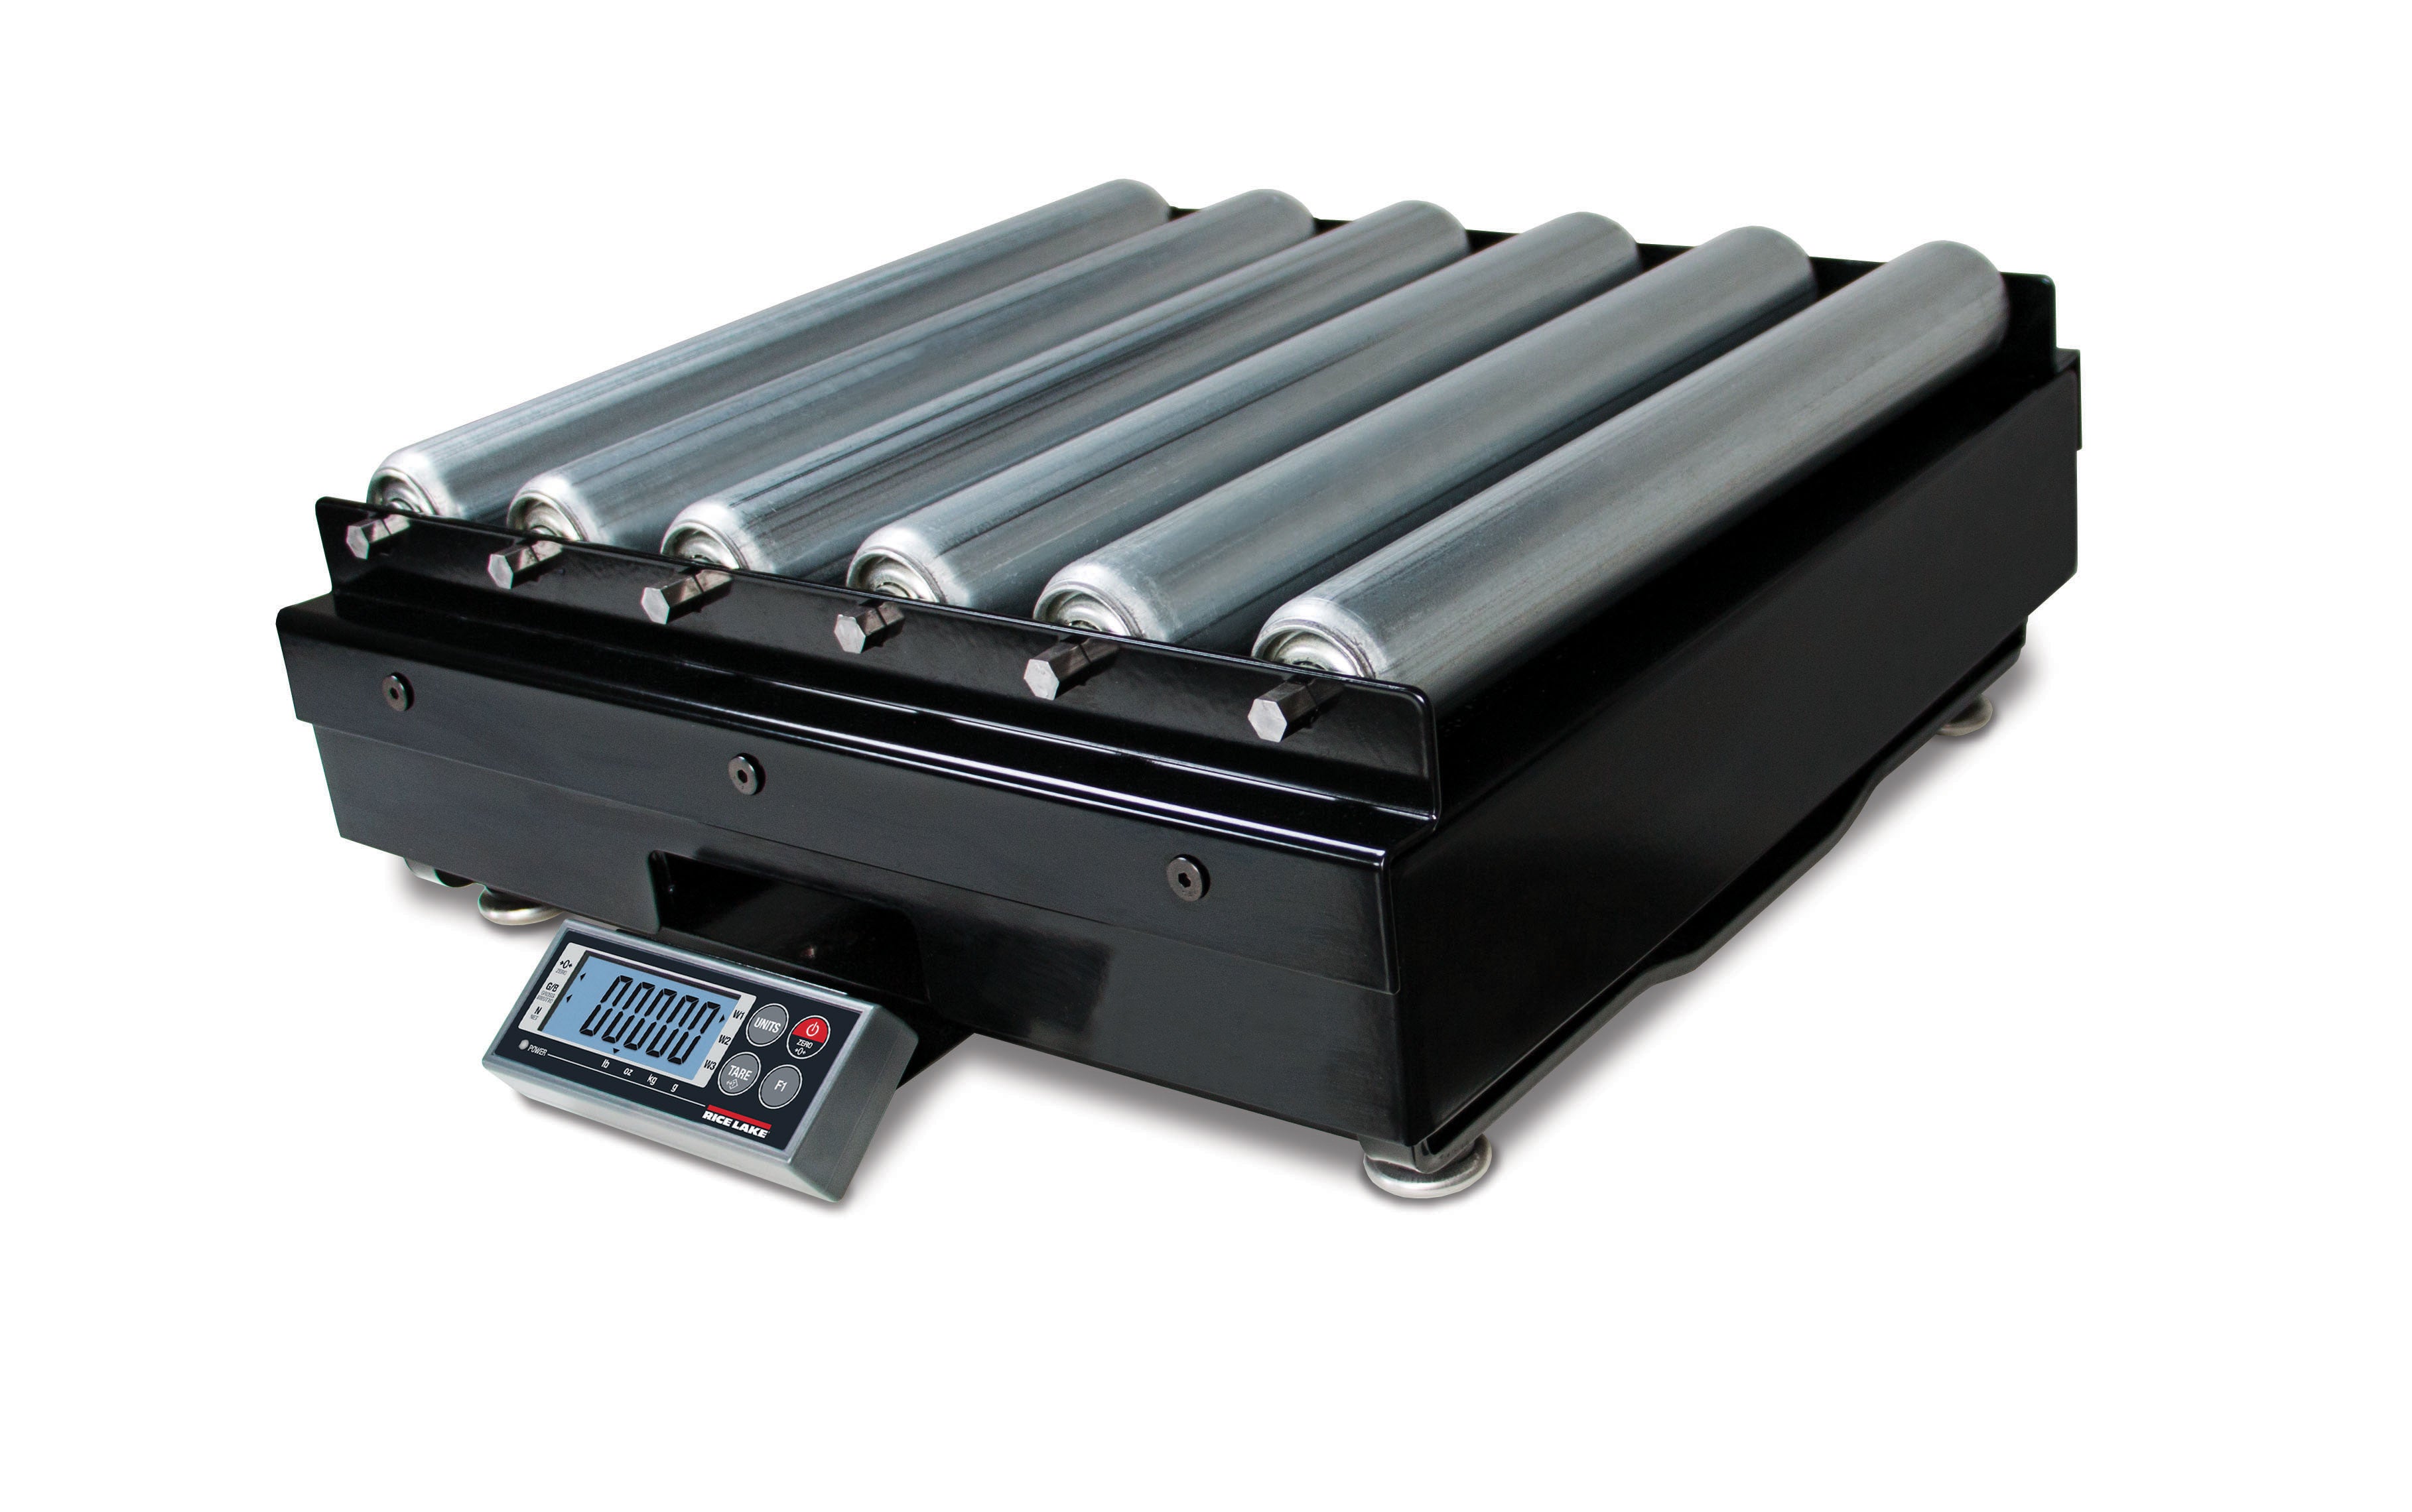 Rice Lake 182402 300 x 0.1 lb/150 x 0.05kg, BP 2424-150S Shipping Digital Scale, Roller Conveyor Top with 2 years Warranty